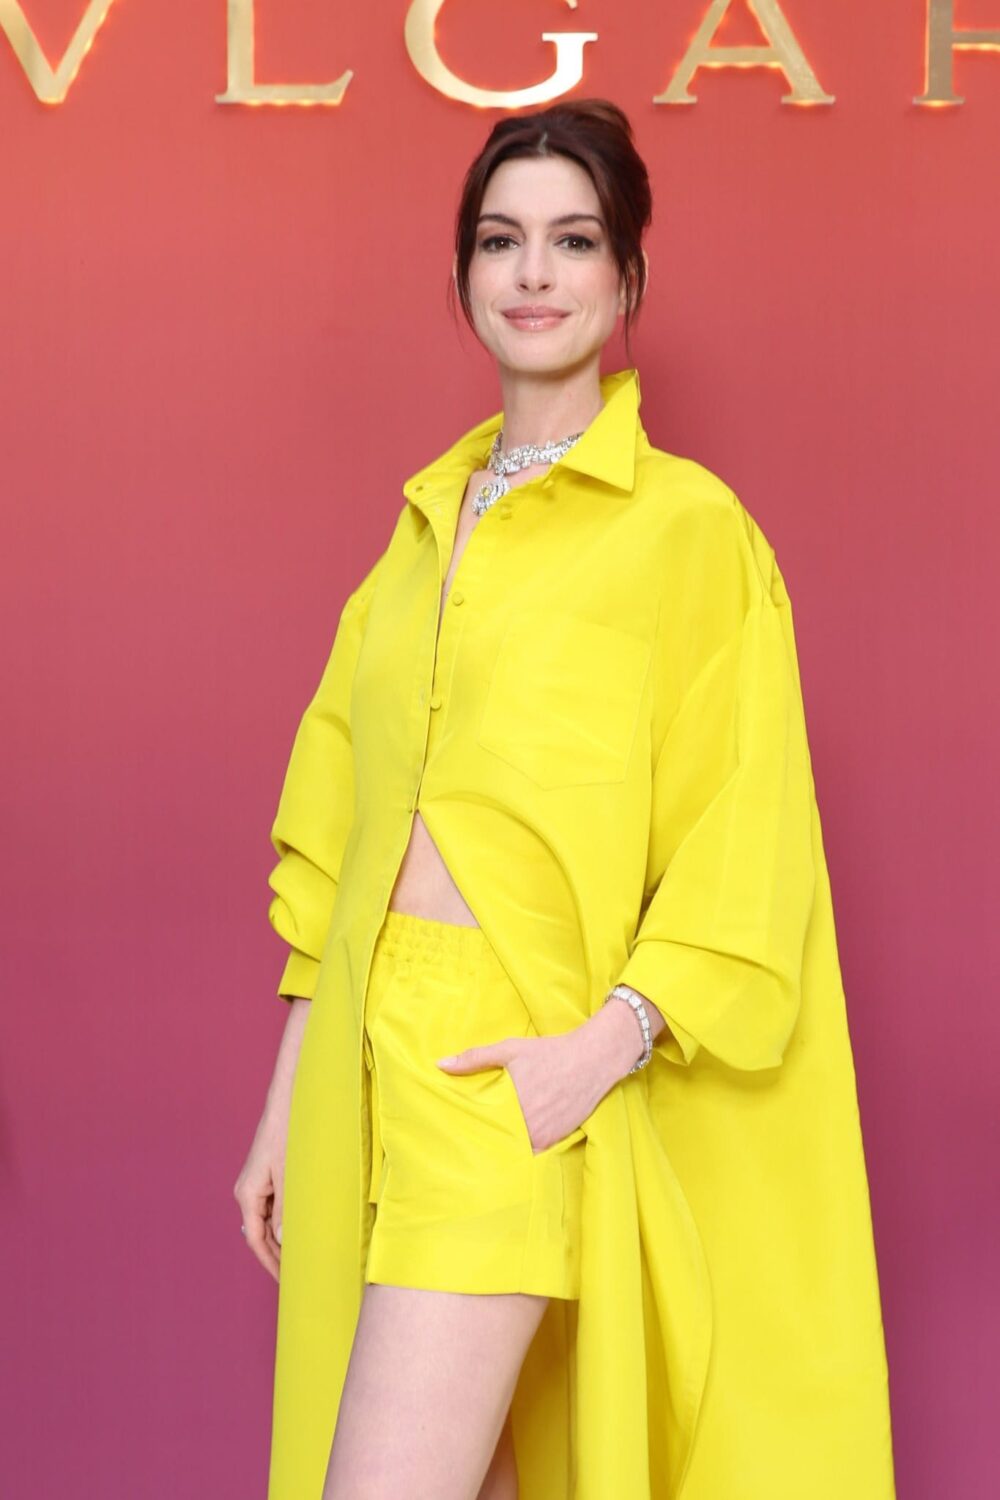 Gorgeous Anne Hathaway in Yellow Valentino Shorts at Bvlgari High Jewelry Gala 2022